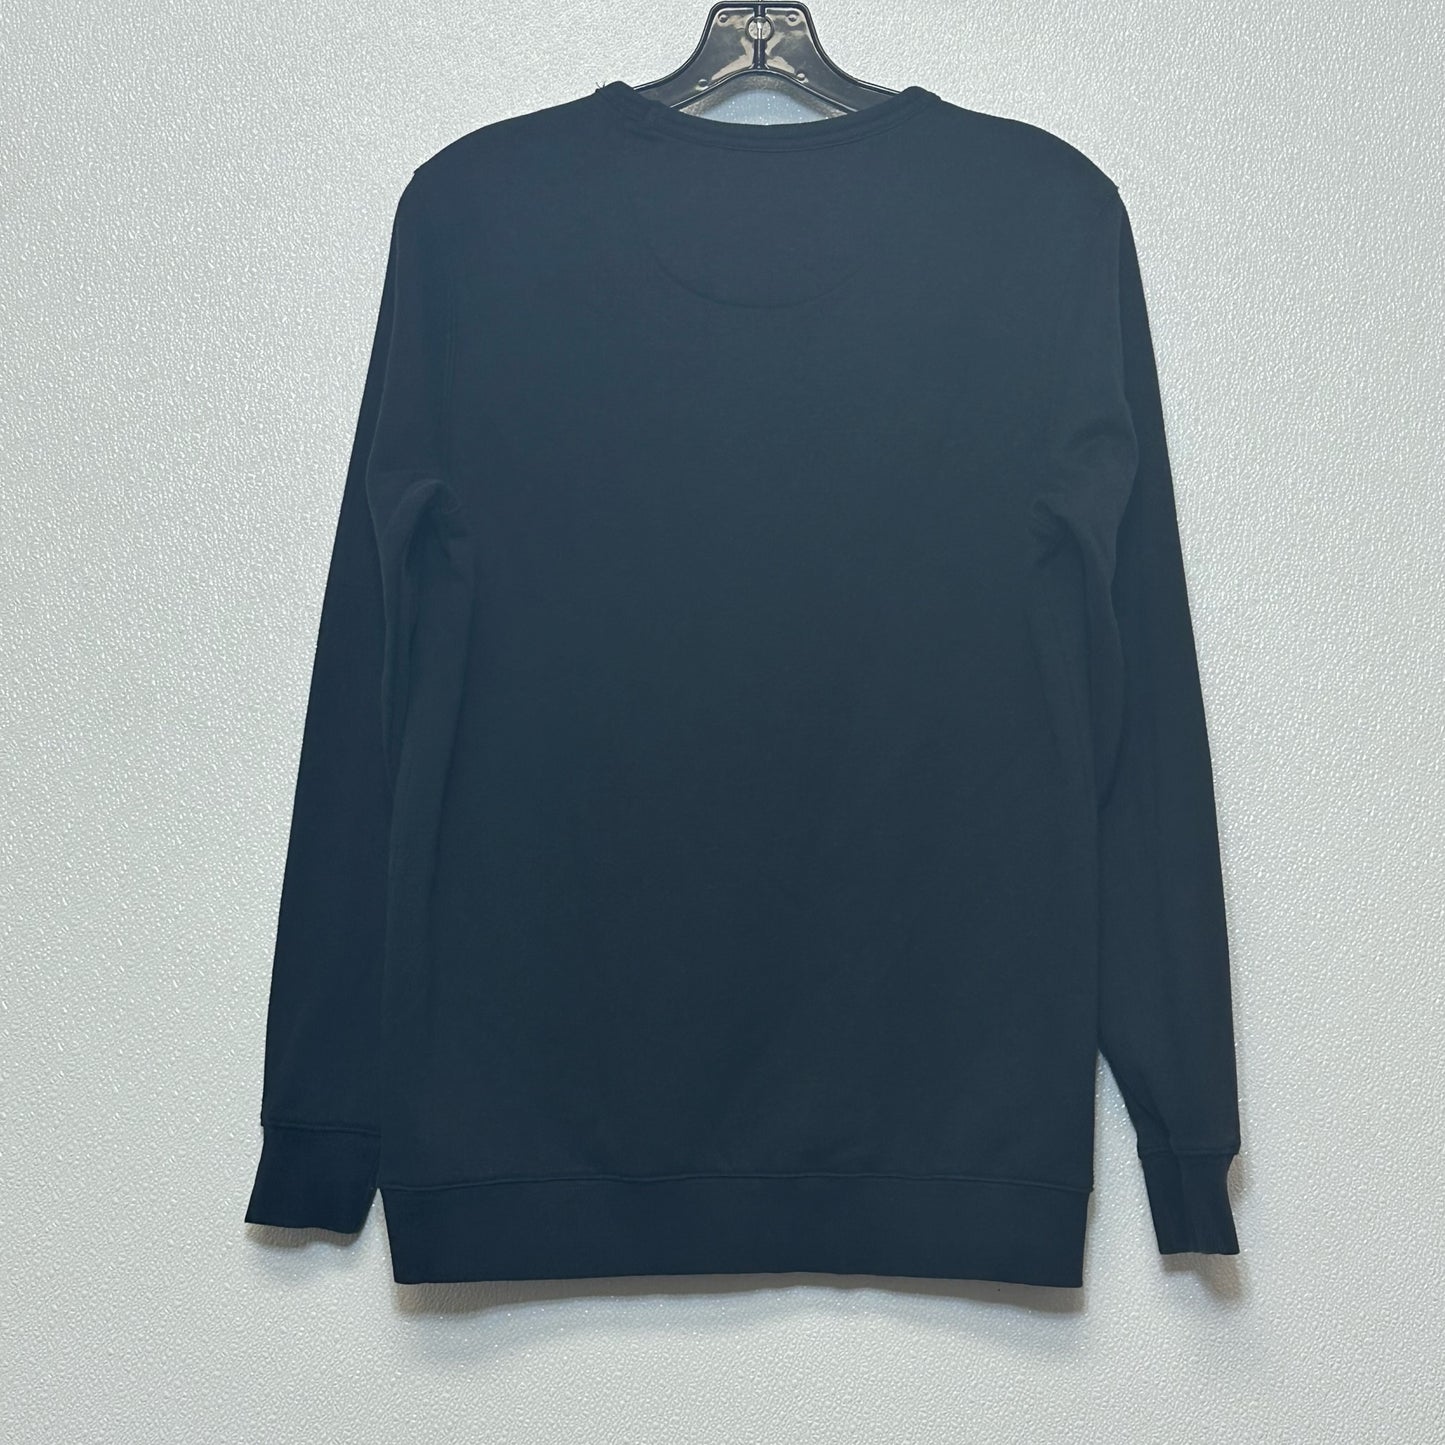 Sweatshirt Crewneck By French Connection  Size: S